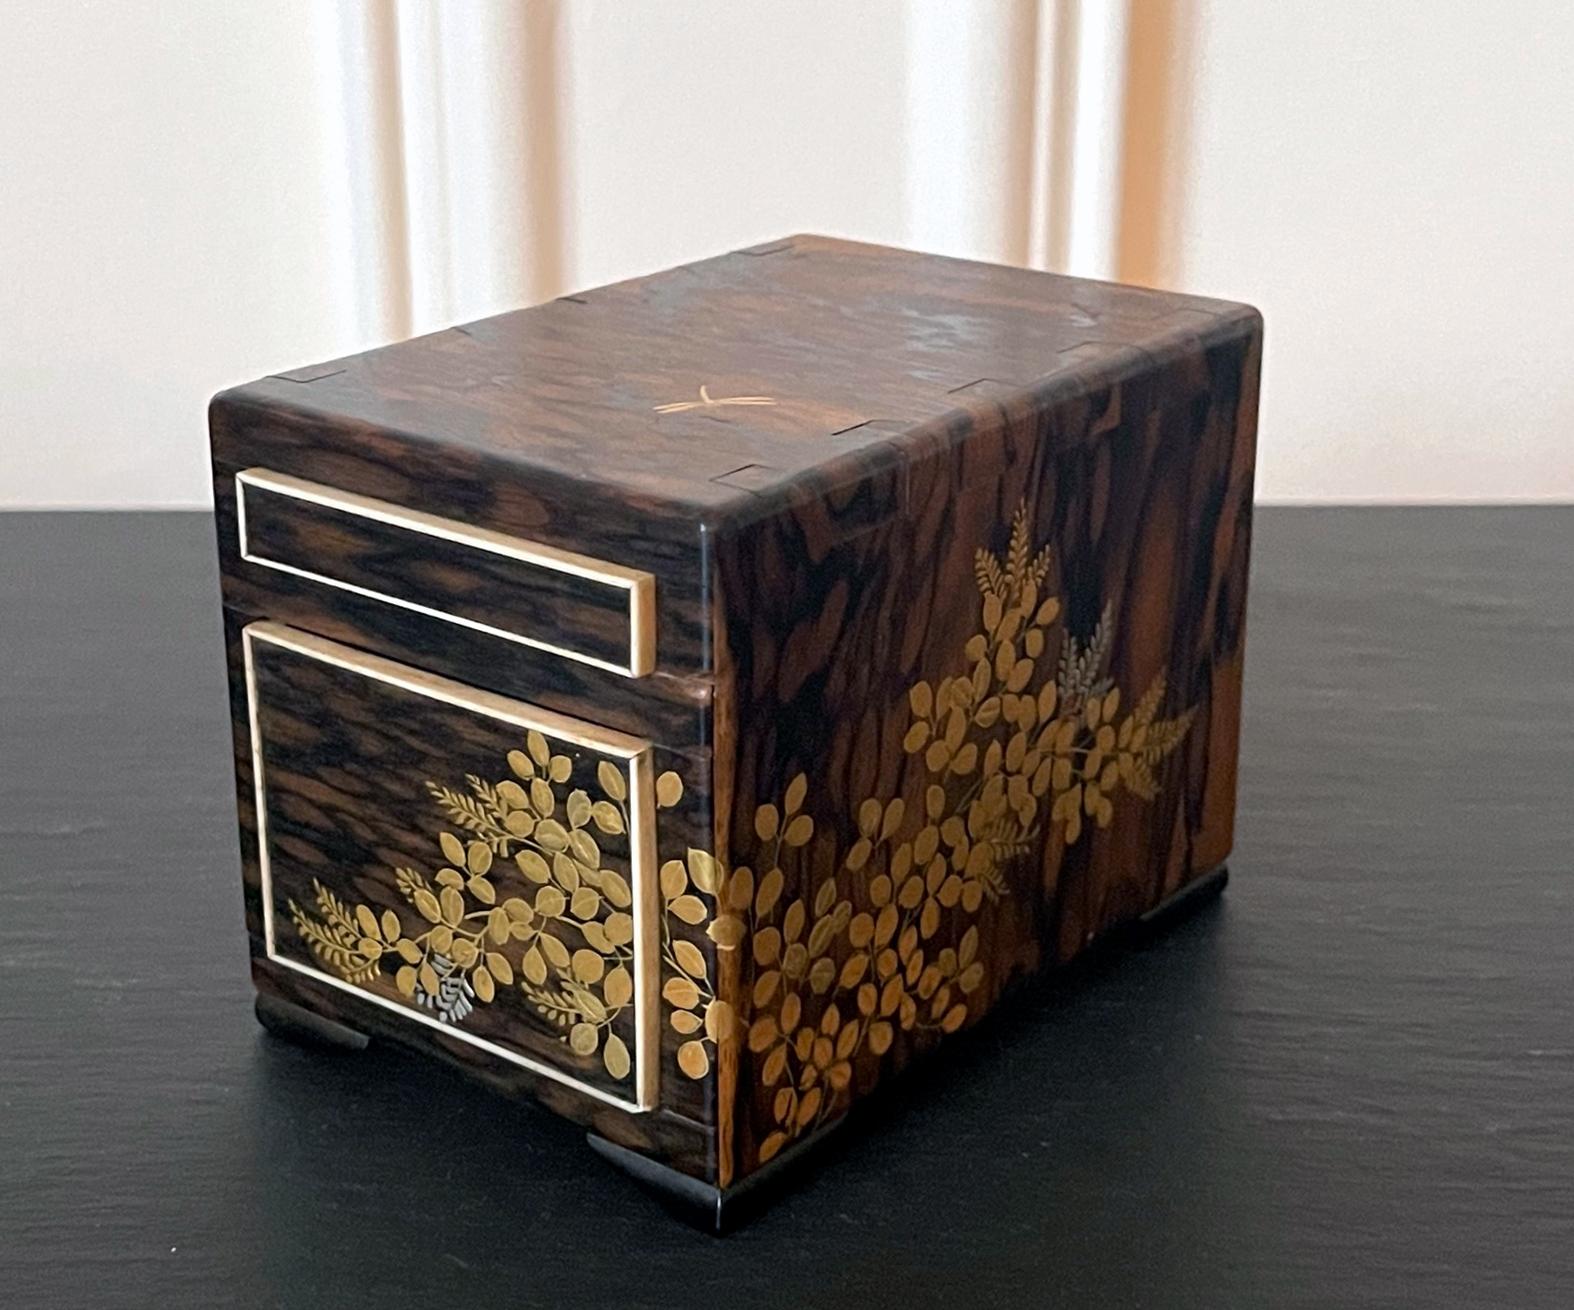 A fine Japanese miniature kodansu constructed from Kaki wood (Persimmon) circa 19th century, late Meiji period. With its expressive exotic wood grains and exposed tenon construction, the small table-top chest with two outlined drawers showcases fine